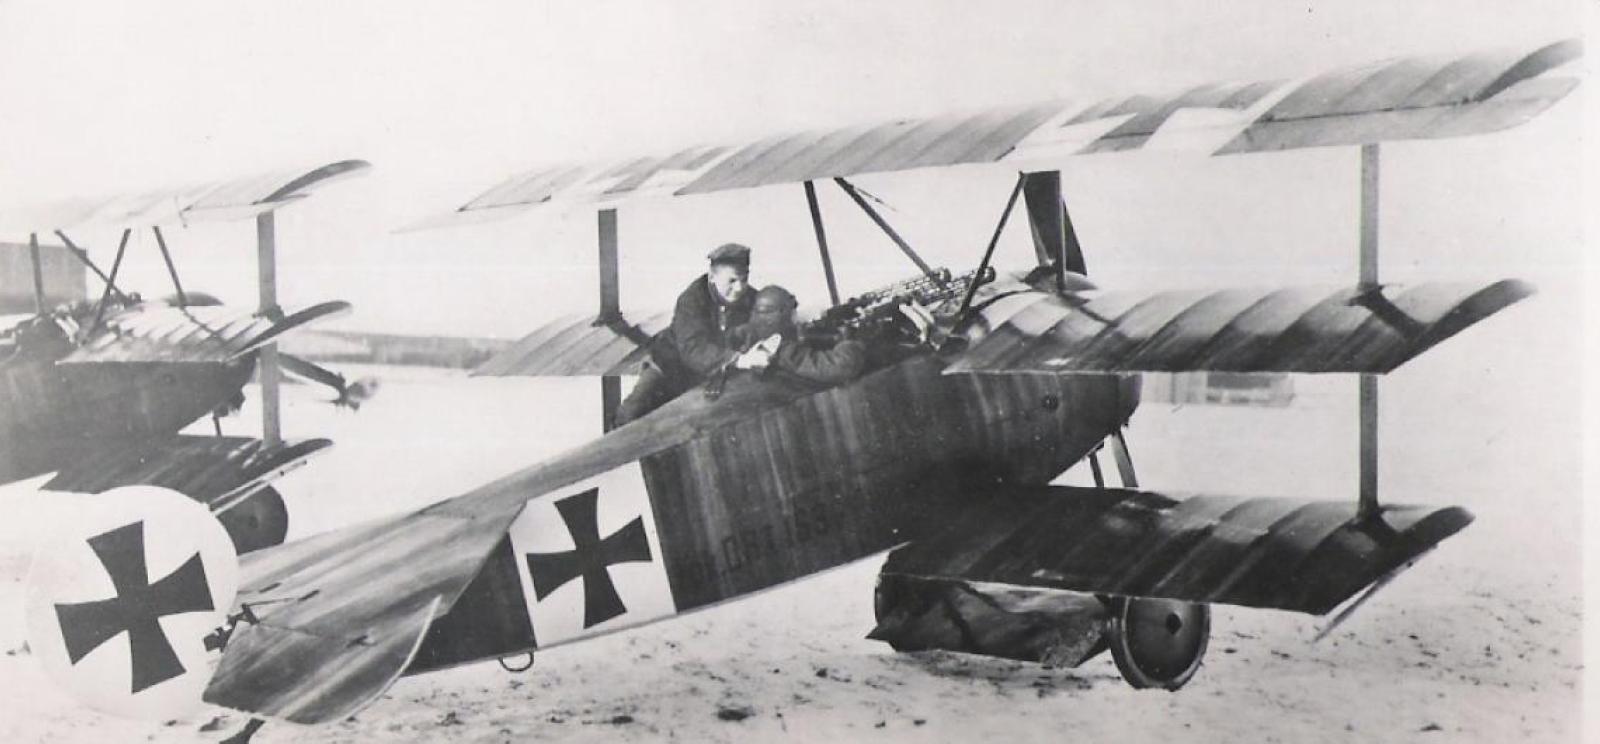 Black and white photo of a WWI-era plane with three layers of wings. A soldier is perched near the cockpit conversing or helping the pilot. The tail and side are decorated with an iron cross.